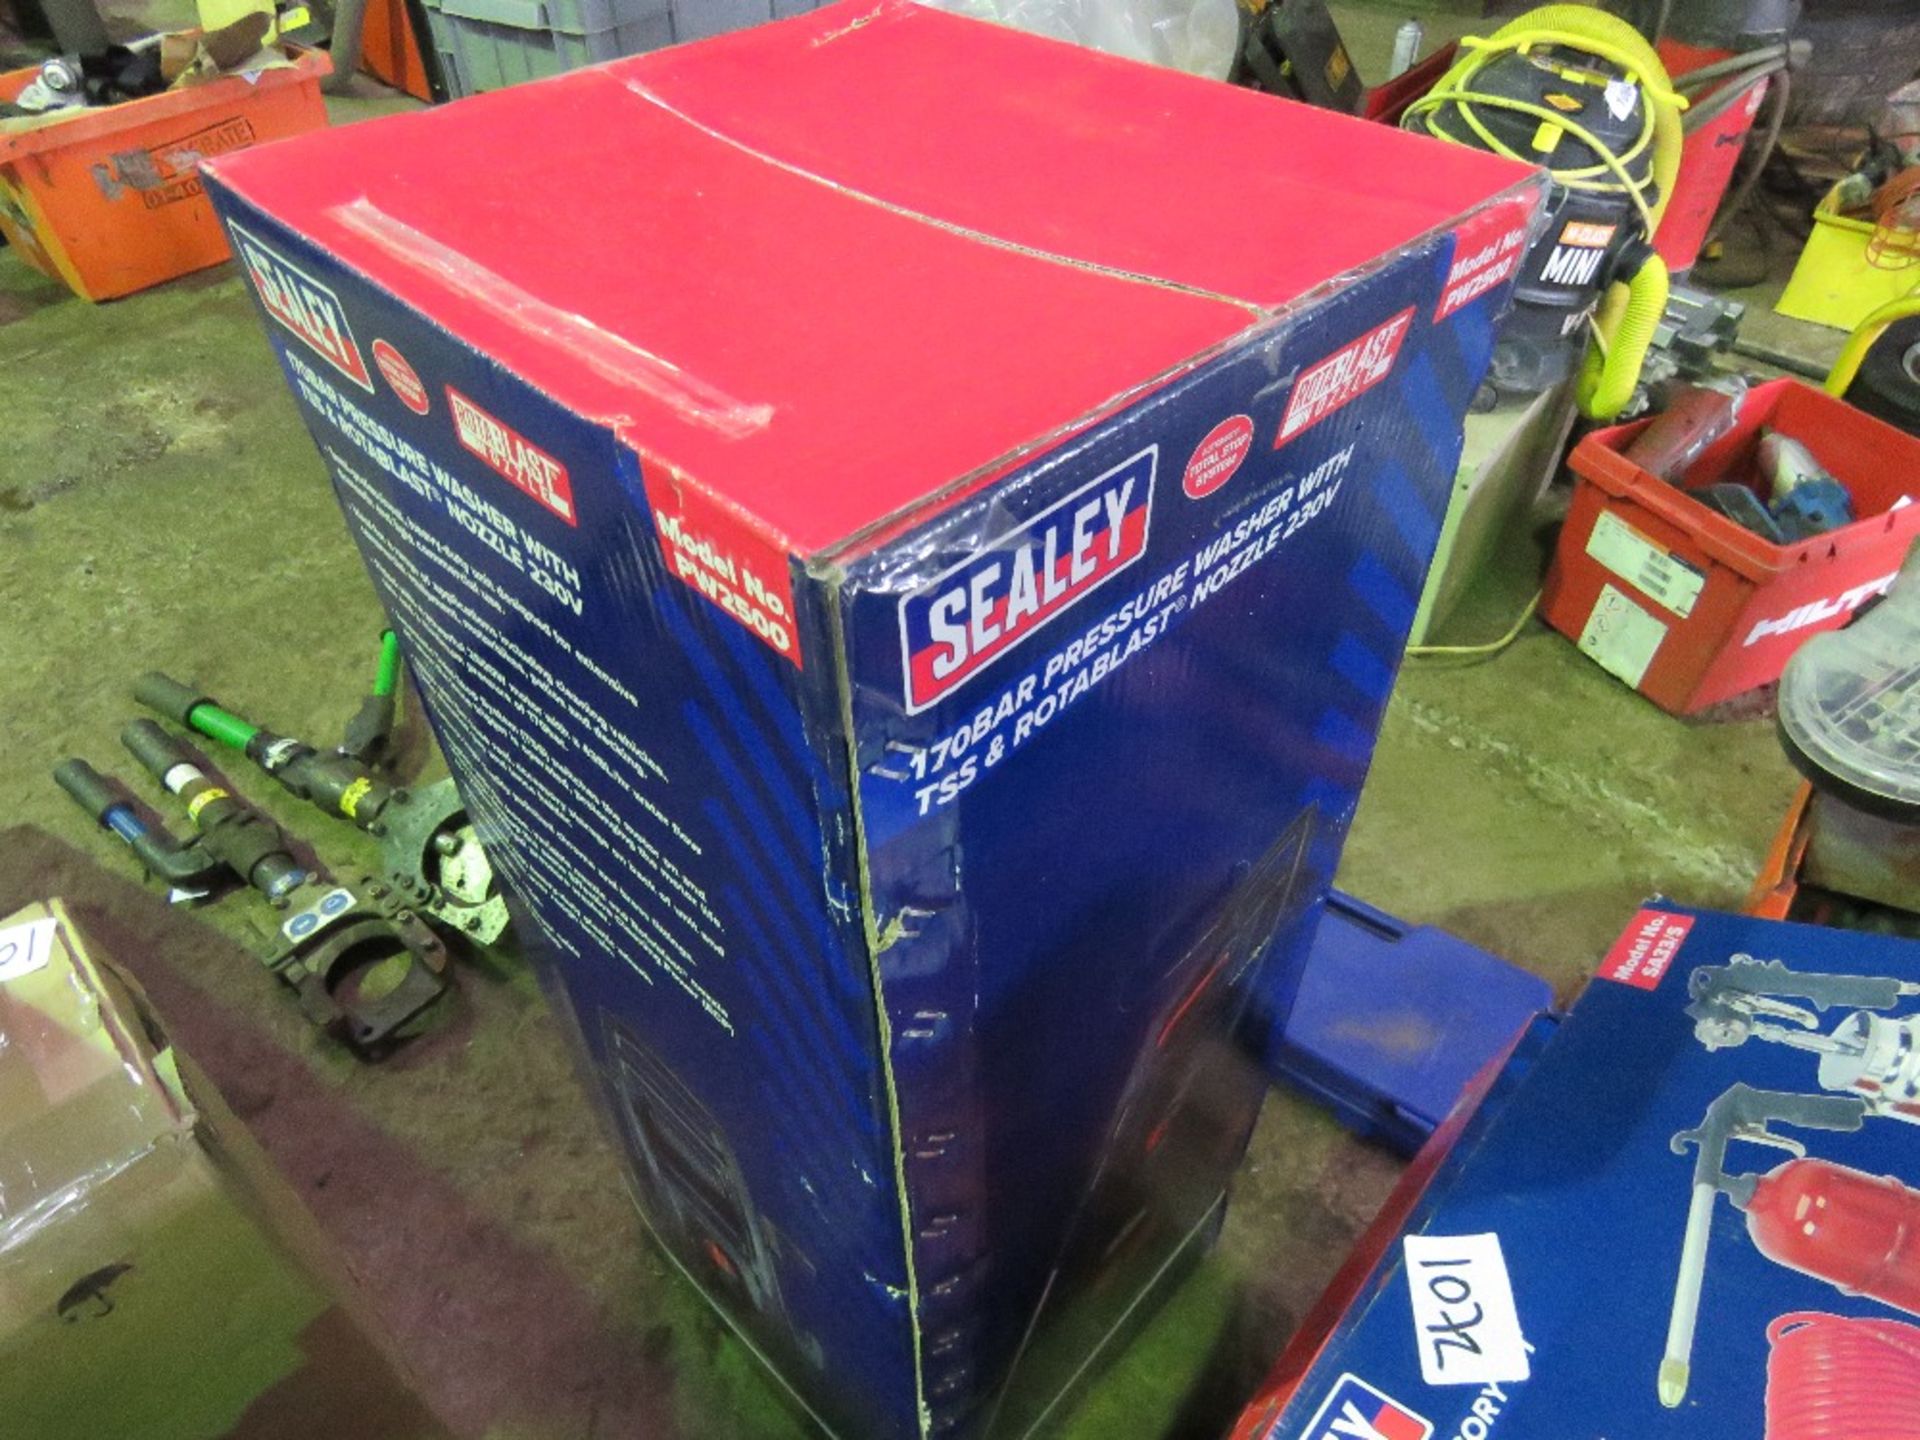 SEALEY 170BAR POWER WASHER SET, 230VOLT POWERED. BOXED, UNUSED, DIRECT FROM LOCAL COMPANY BEING SURP - Image 4 of 4